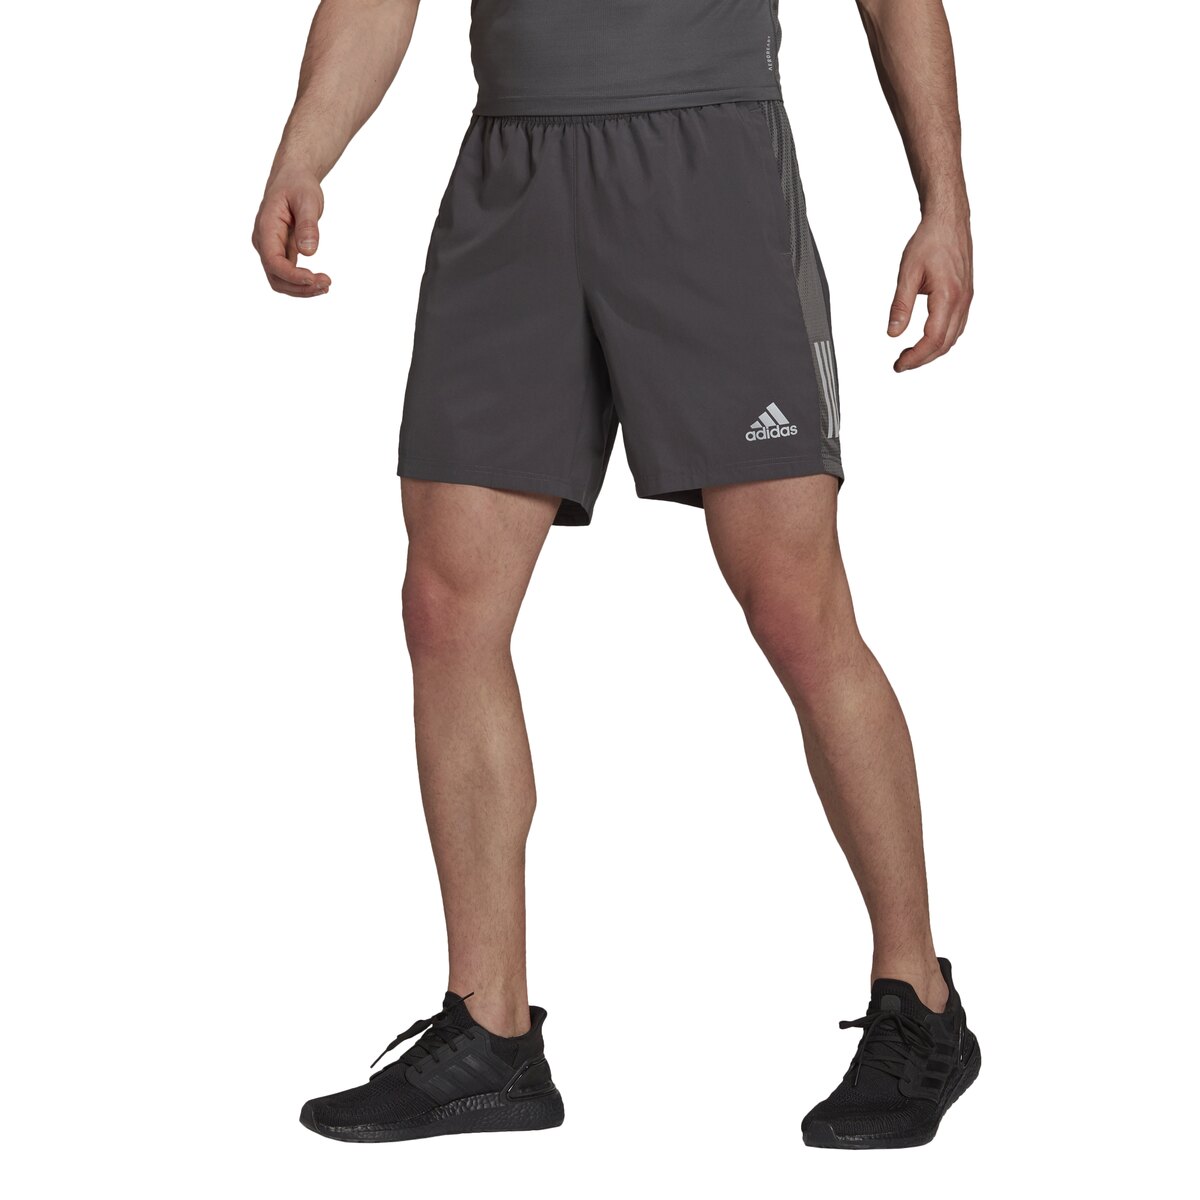 SHORTS OWN THE ADIDAS RUNNING